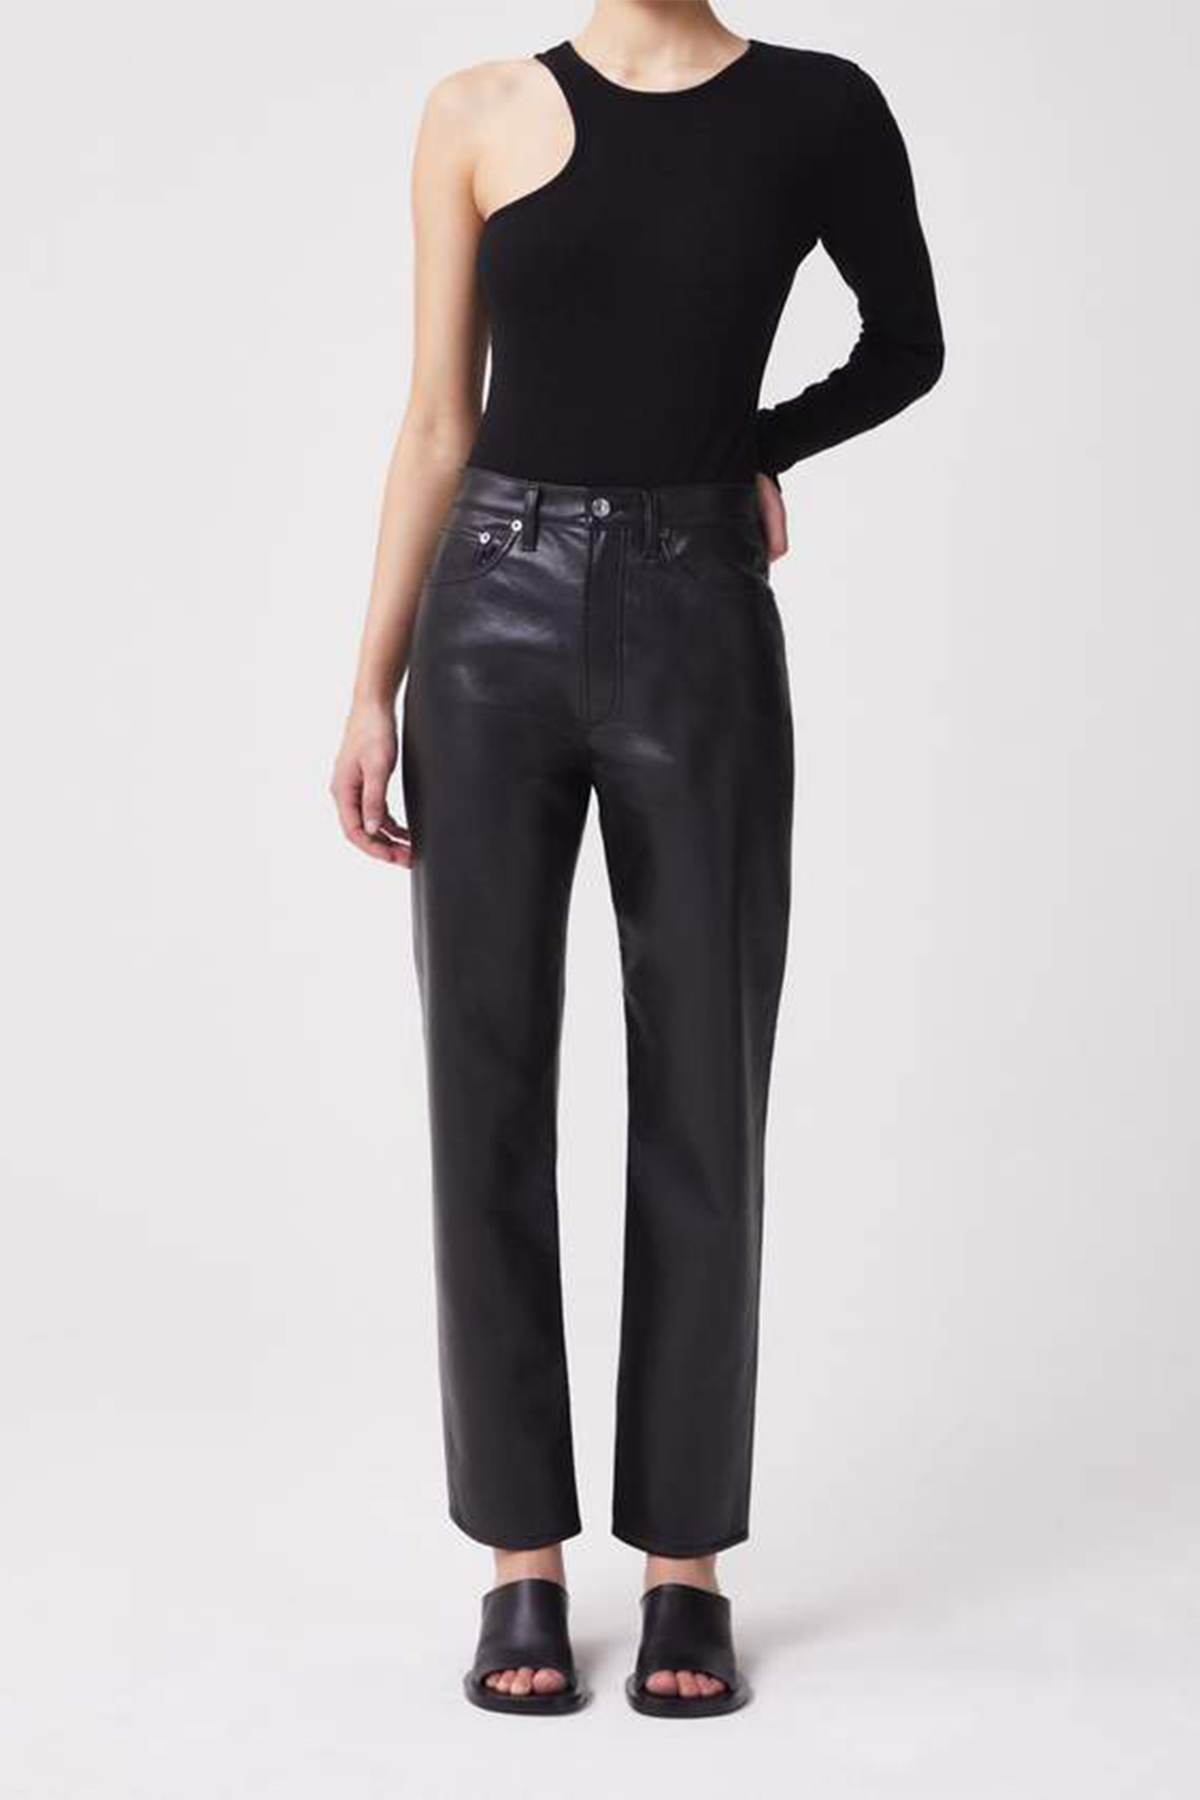 Agolde Recycled Leather 90's Pinch Waist Pants